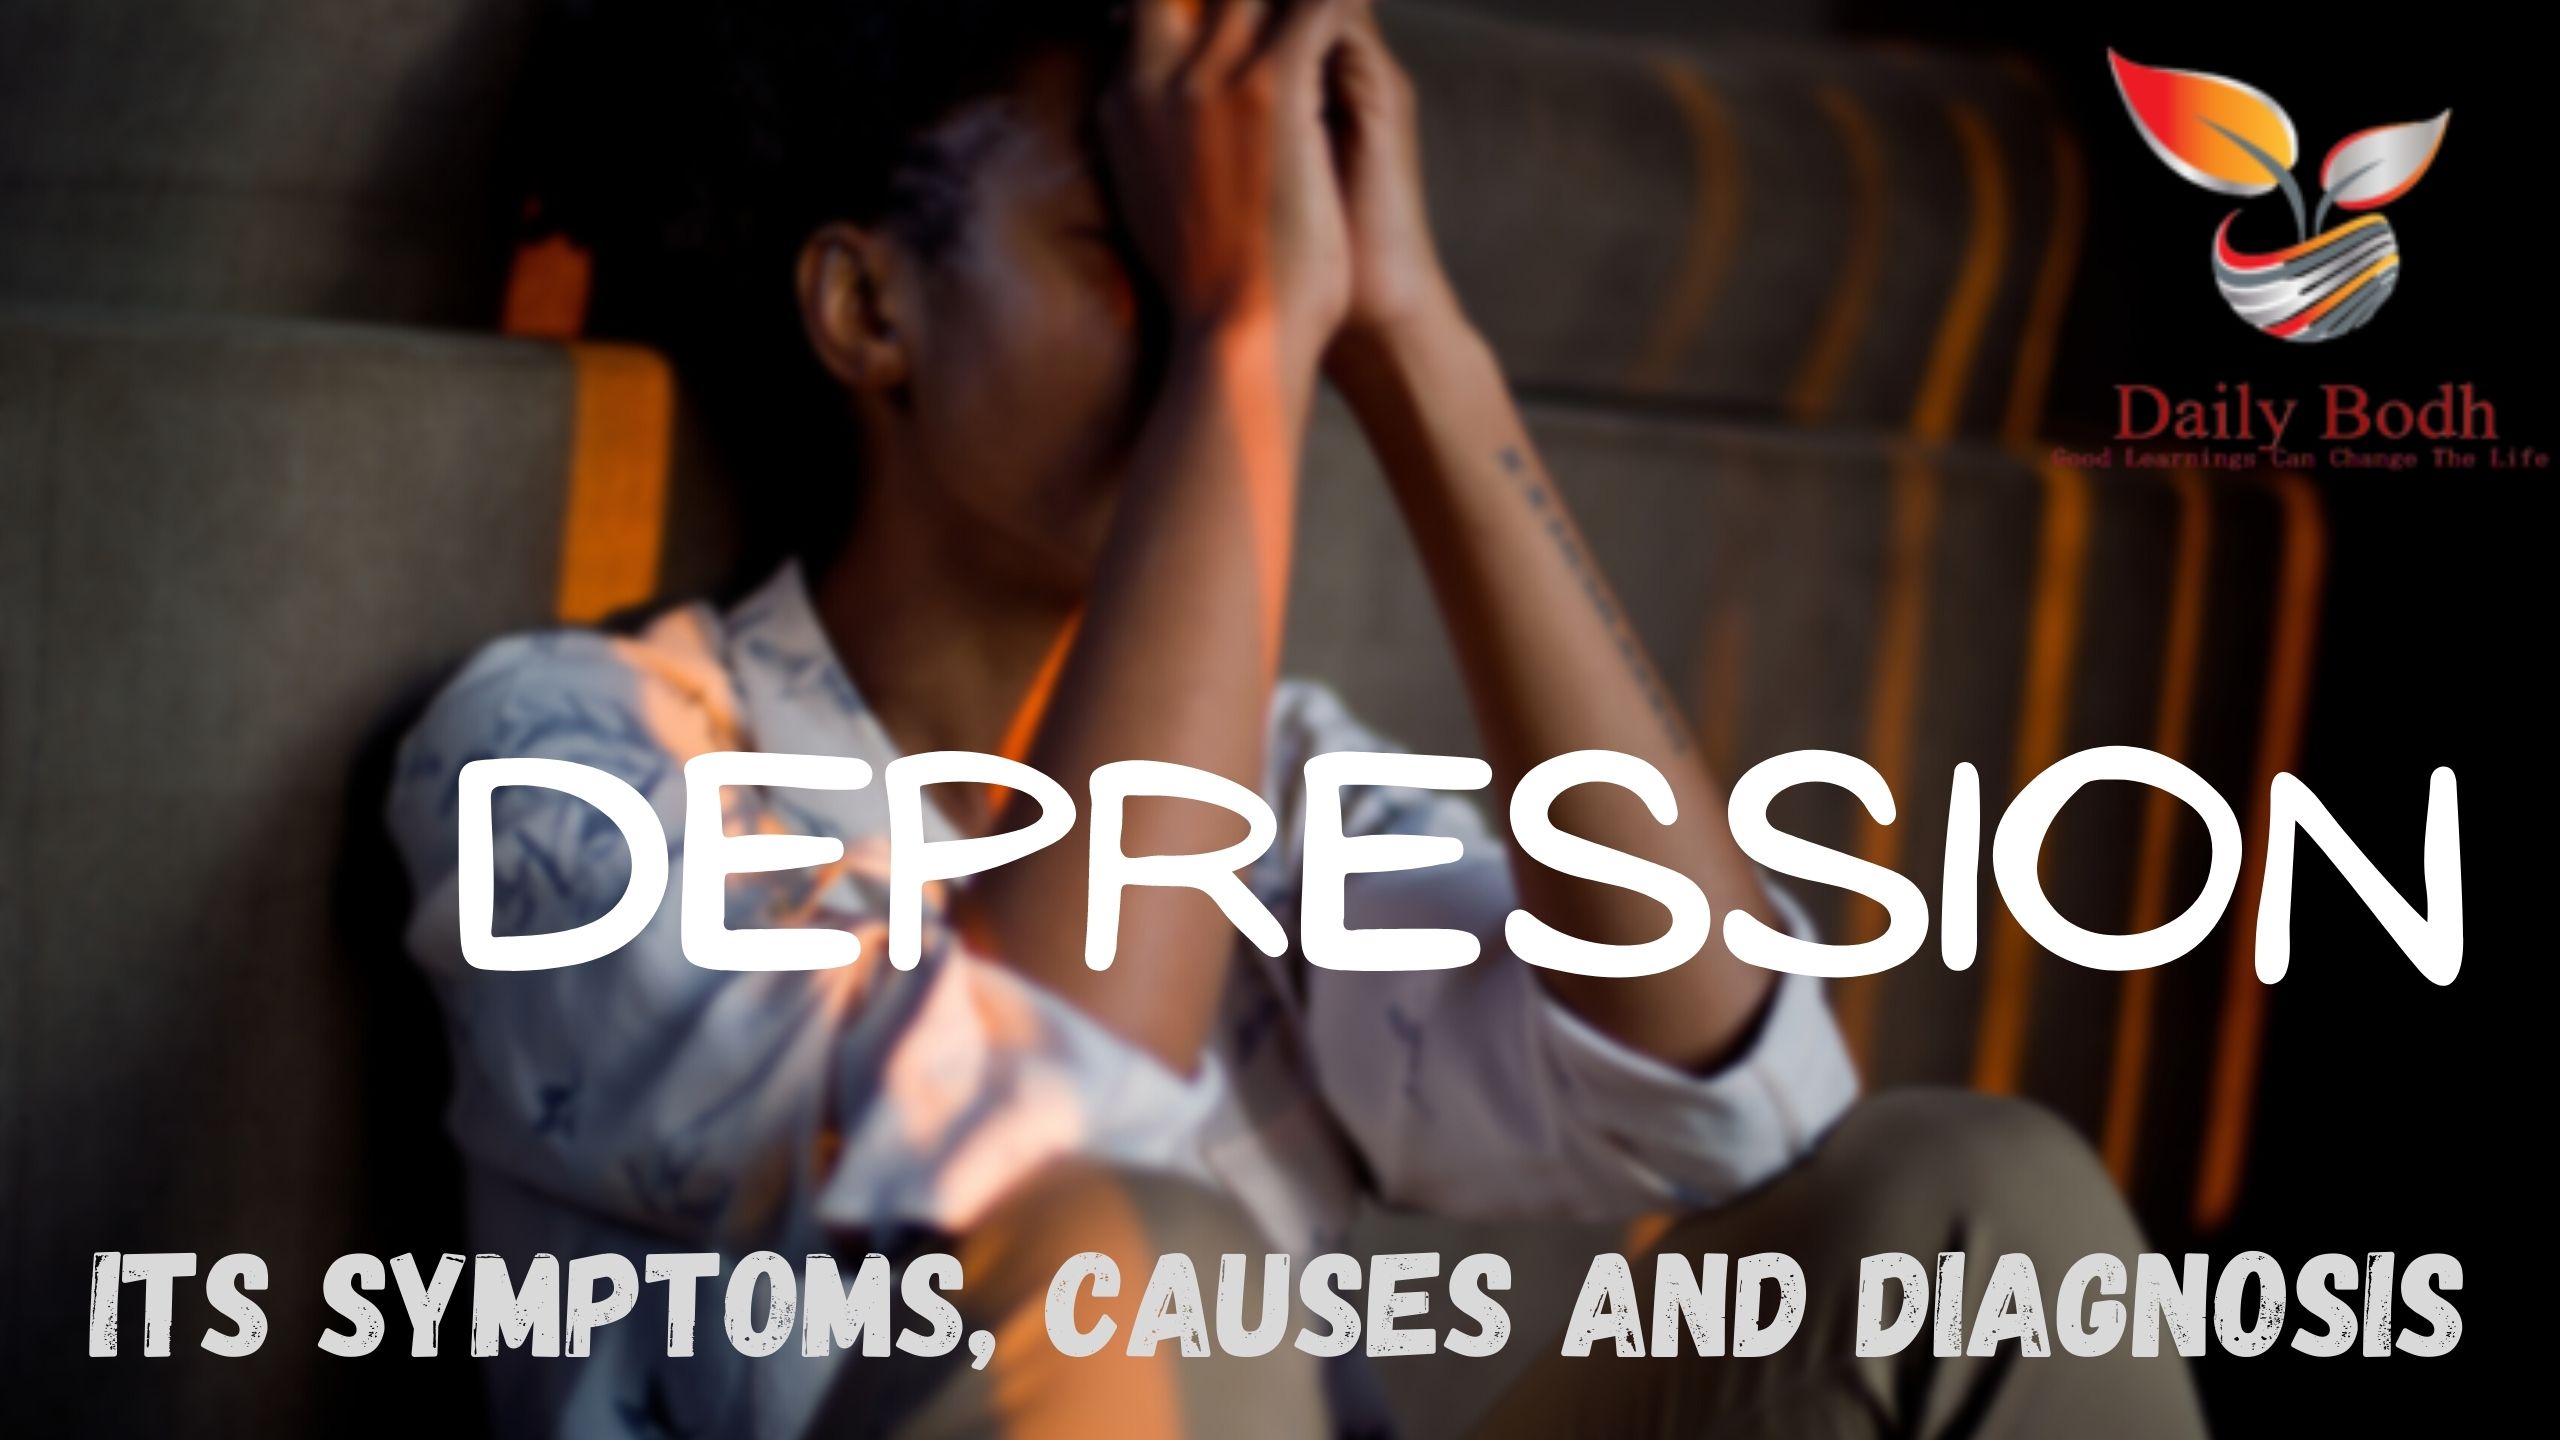 You are currently viewing Depression- Its Symptoms, Causes and Diagnosis